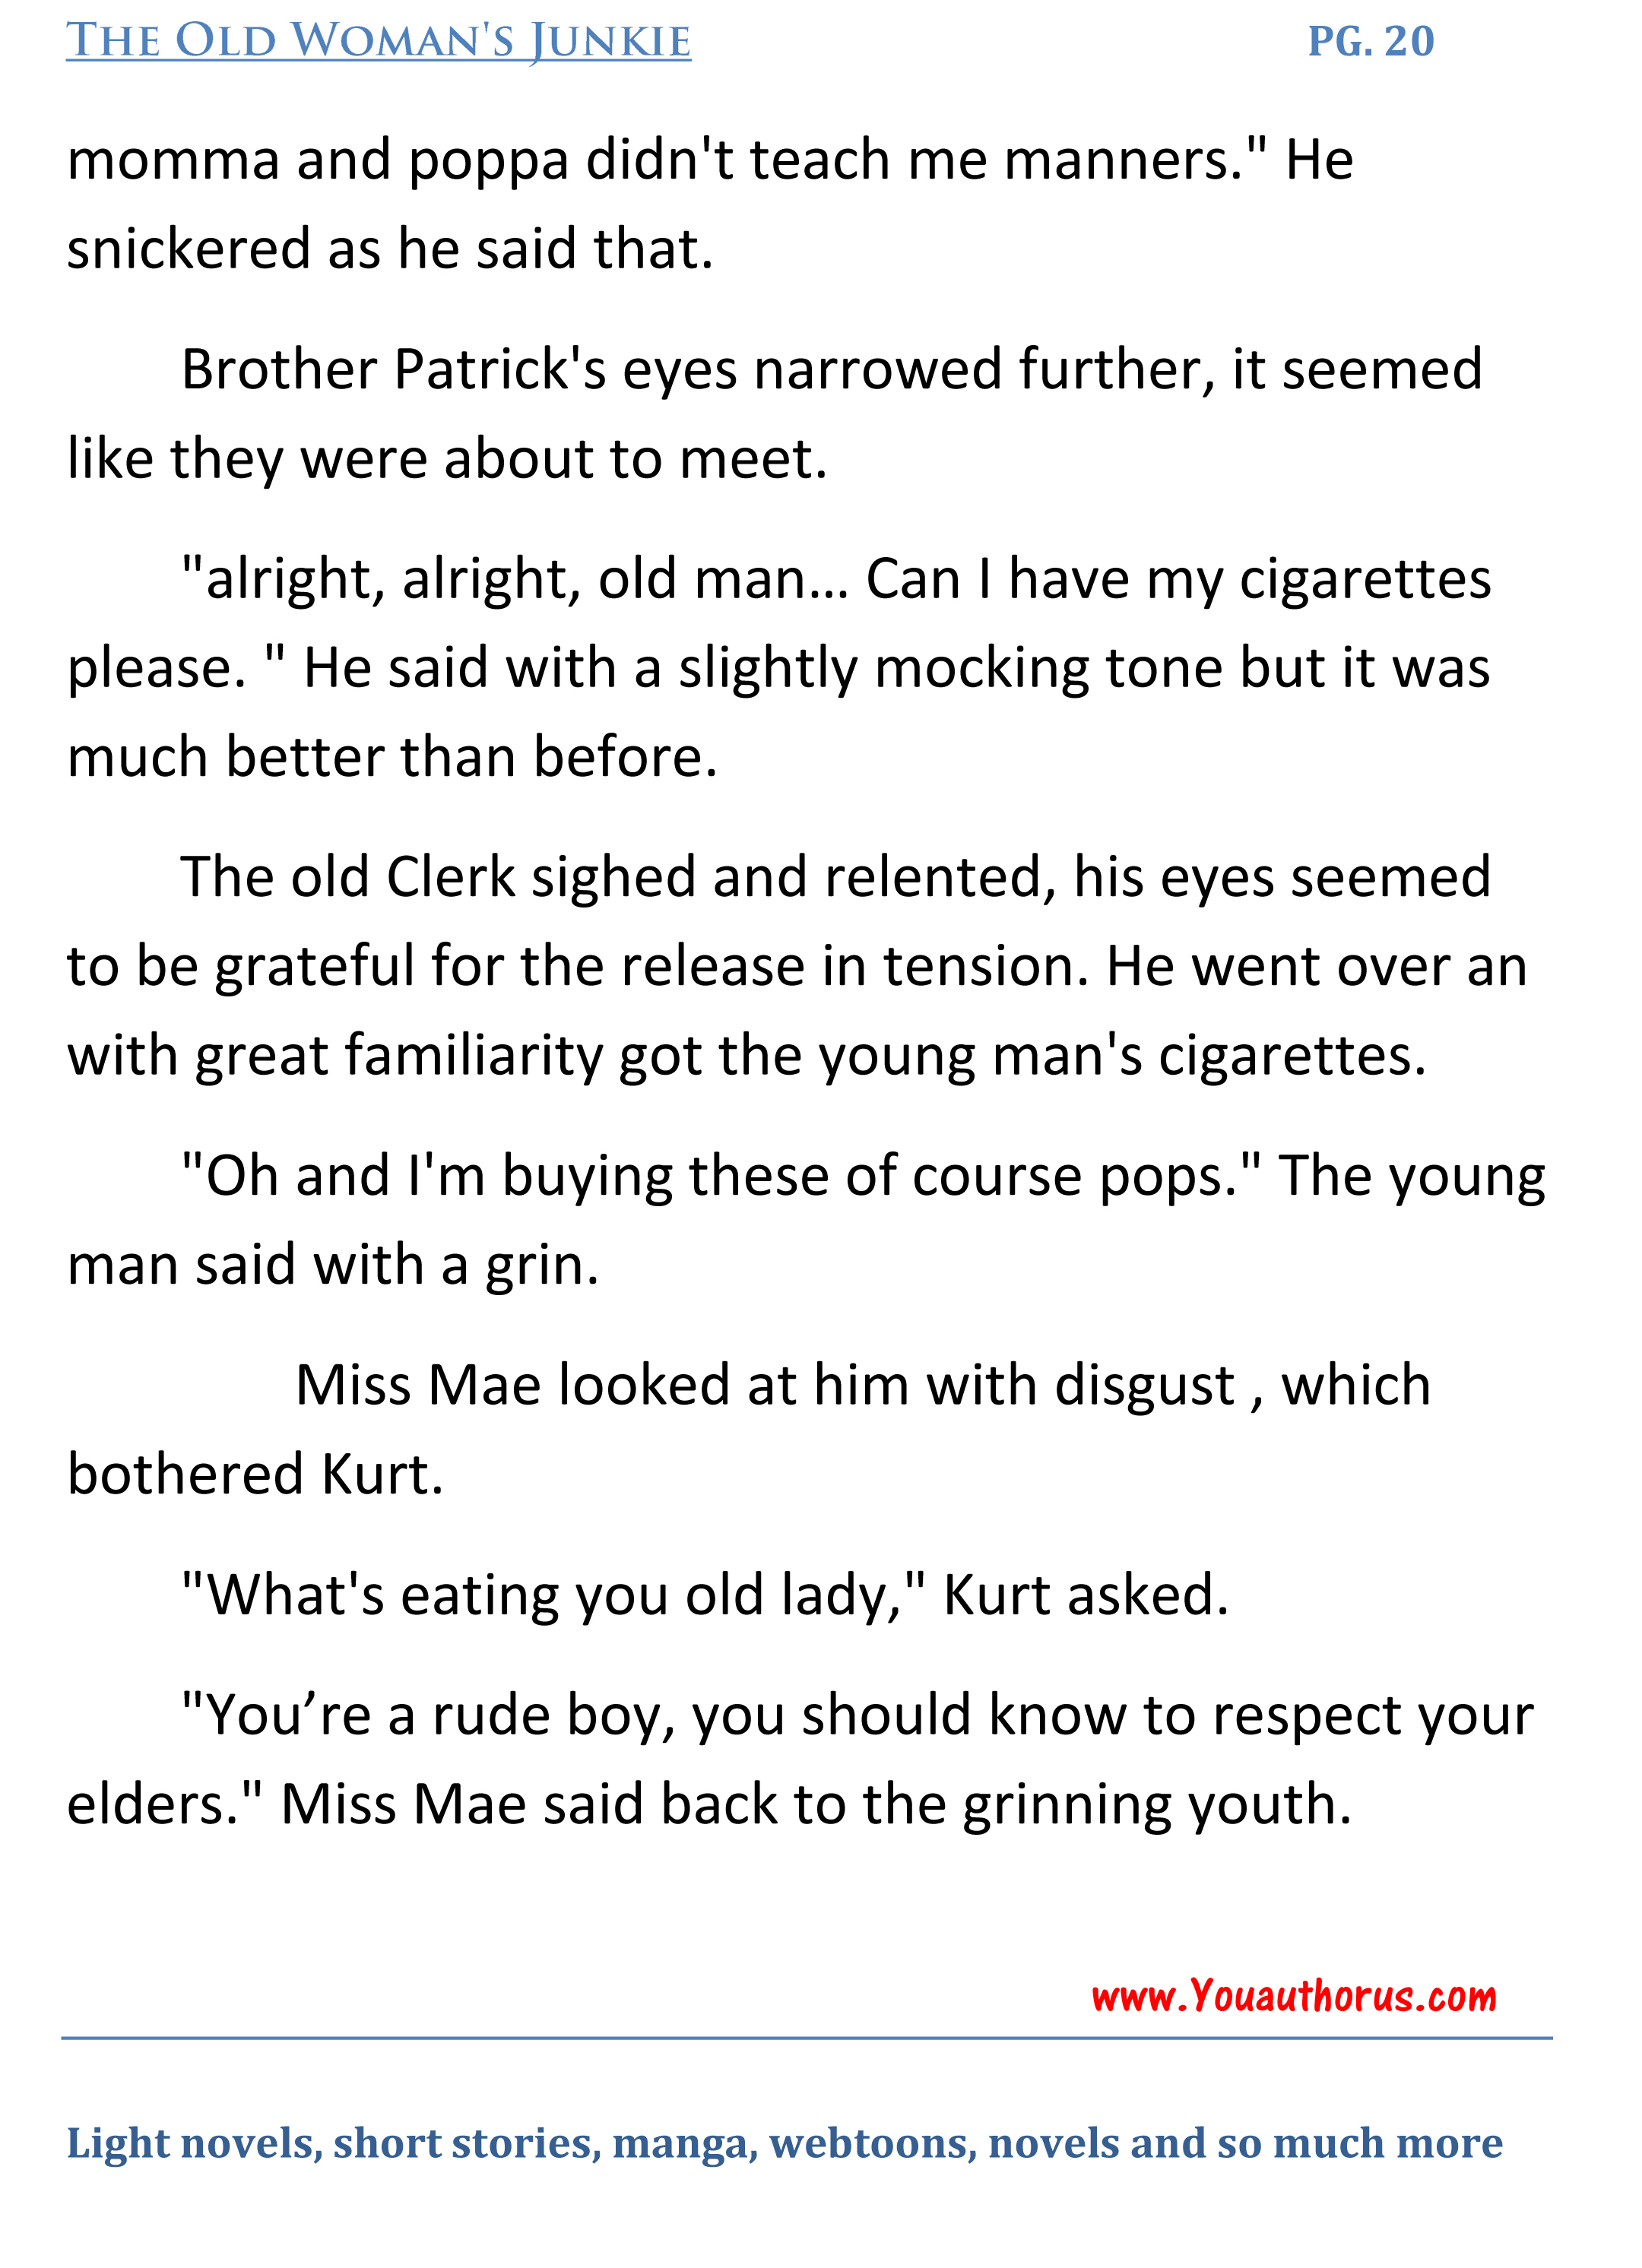 The Old Woman's Junkie(publishing 1)-20 copy